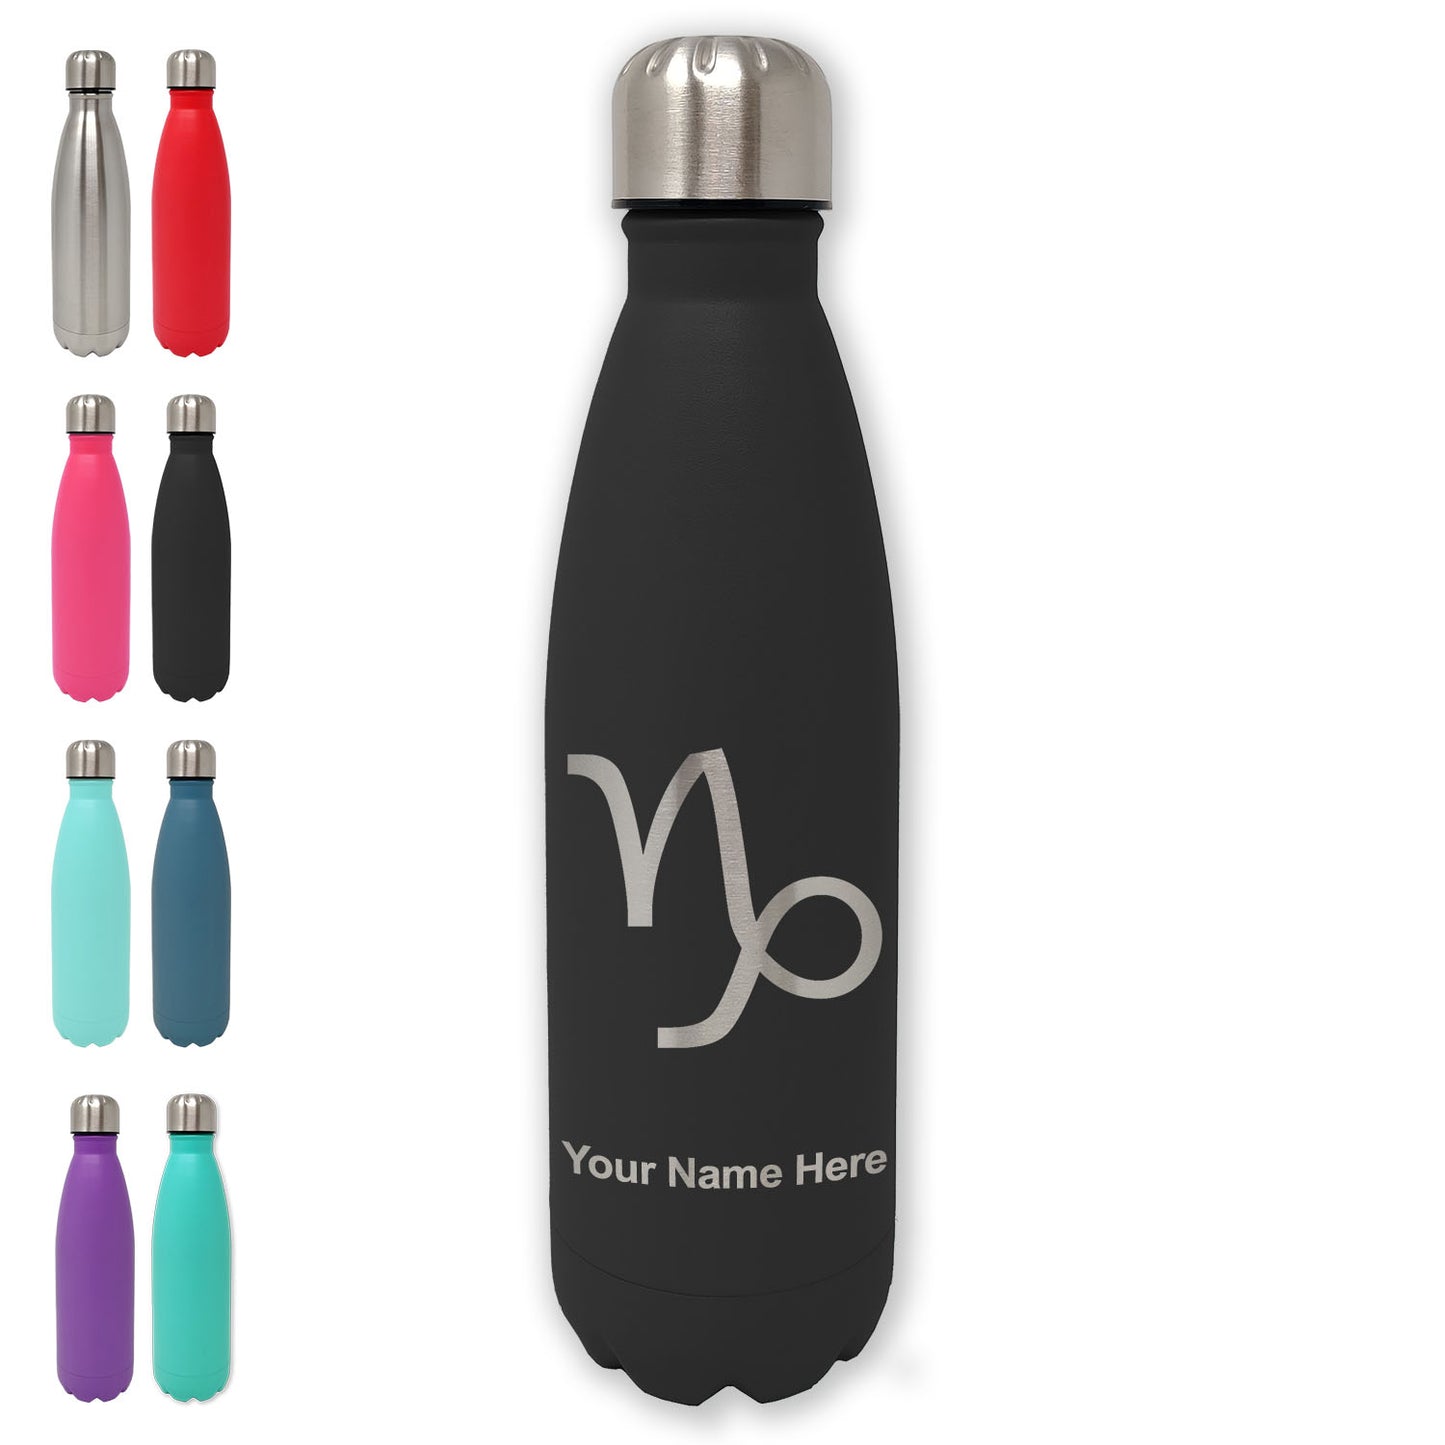 LaserGram Double Wall Water Bottle, Zodiac Sign Capricorn, Personalized Engraving Included